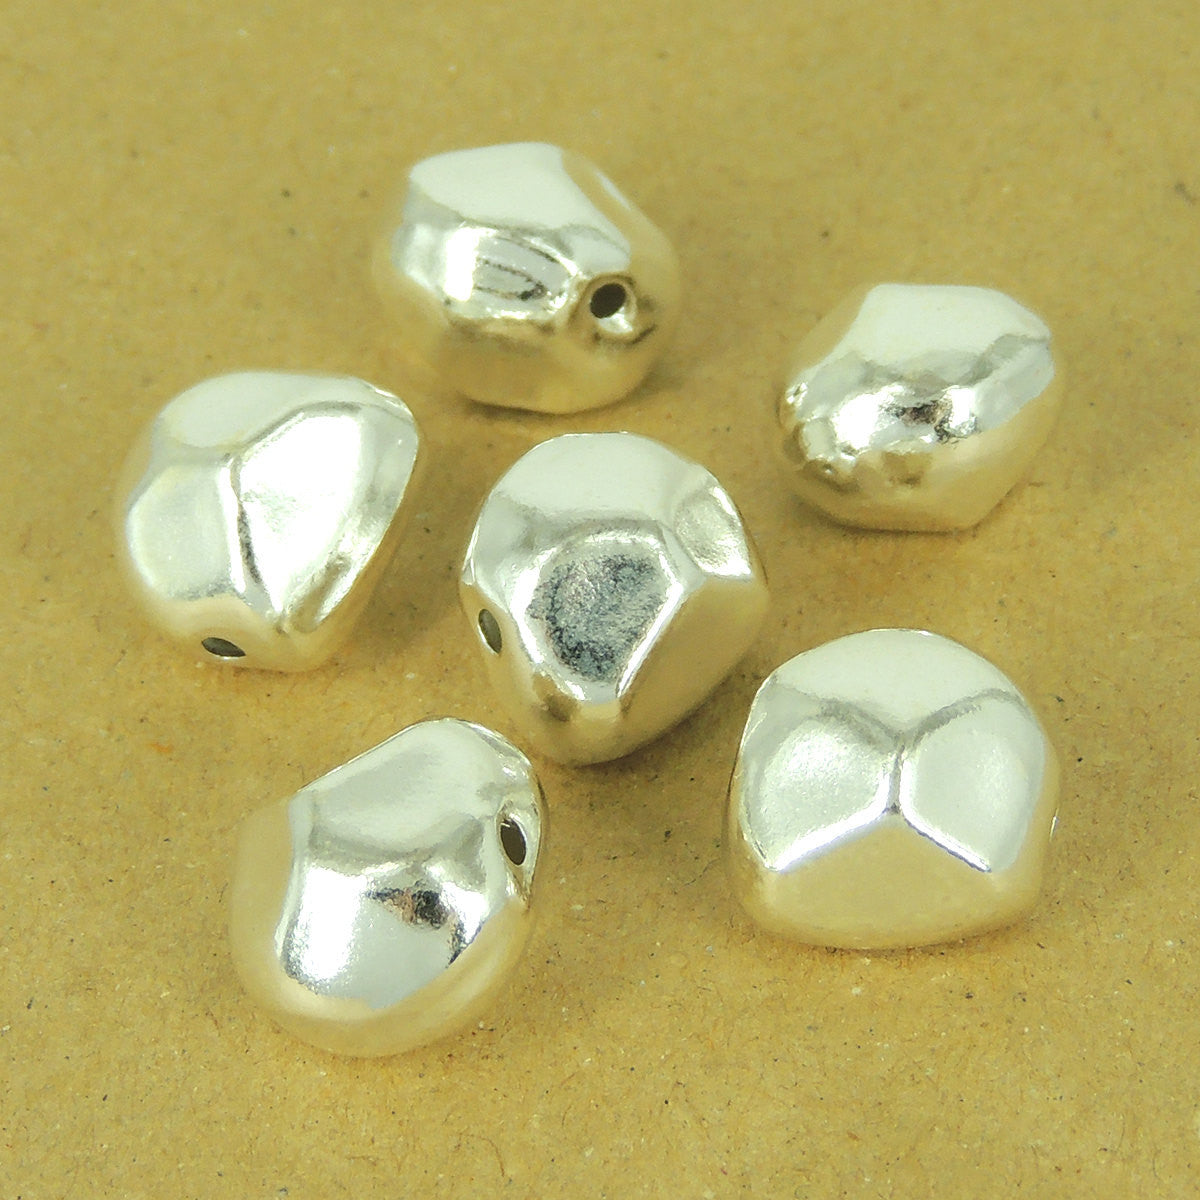 5g/pack S925 Sterling Silver Spacer Beads, Wheel Shaped, Bubble Shaped,  Flat Round, Suitable For Diy Bracelet Making